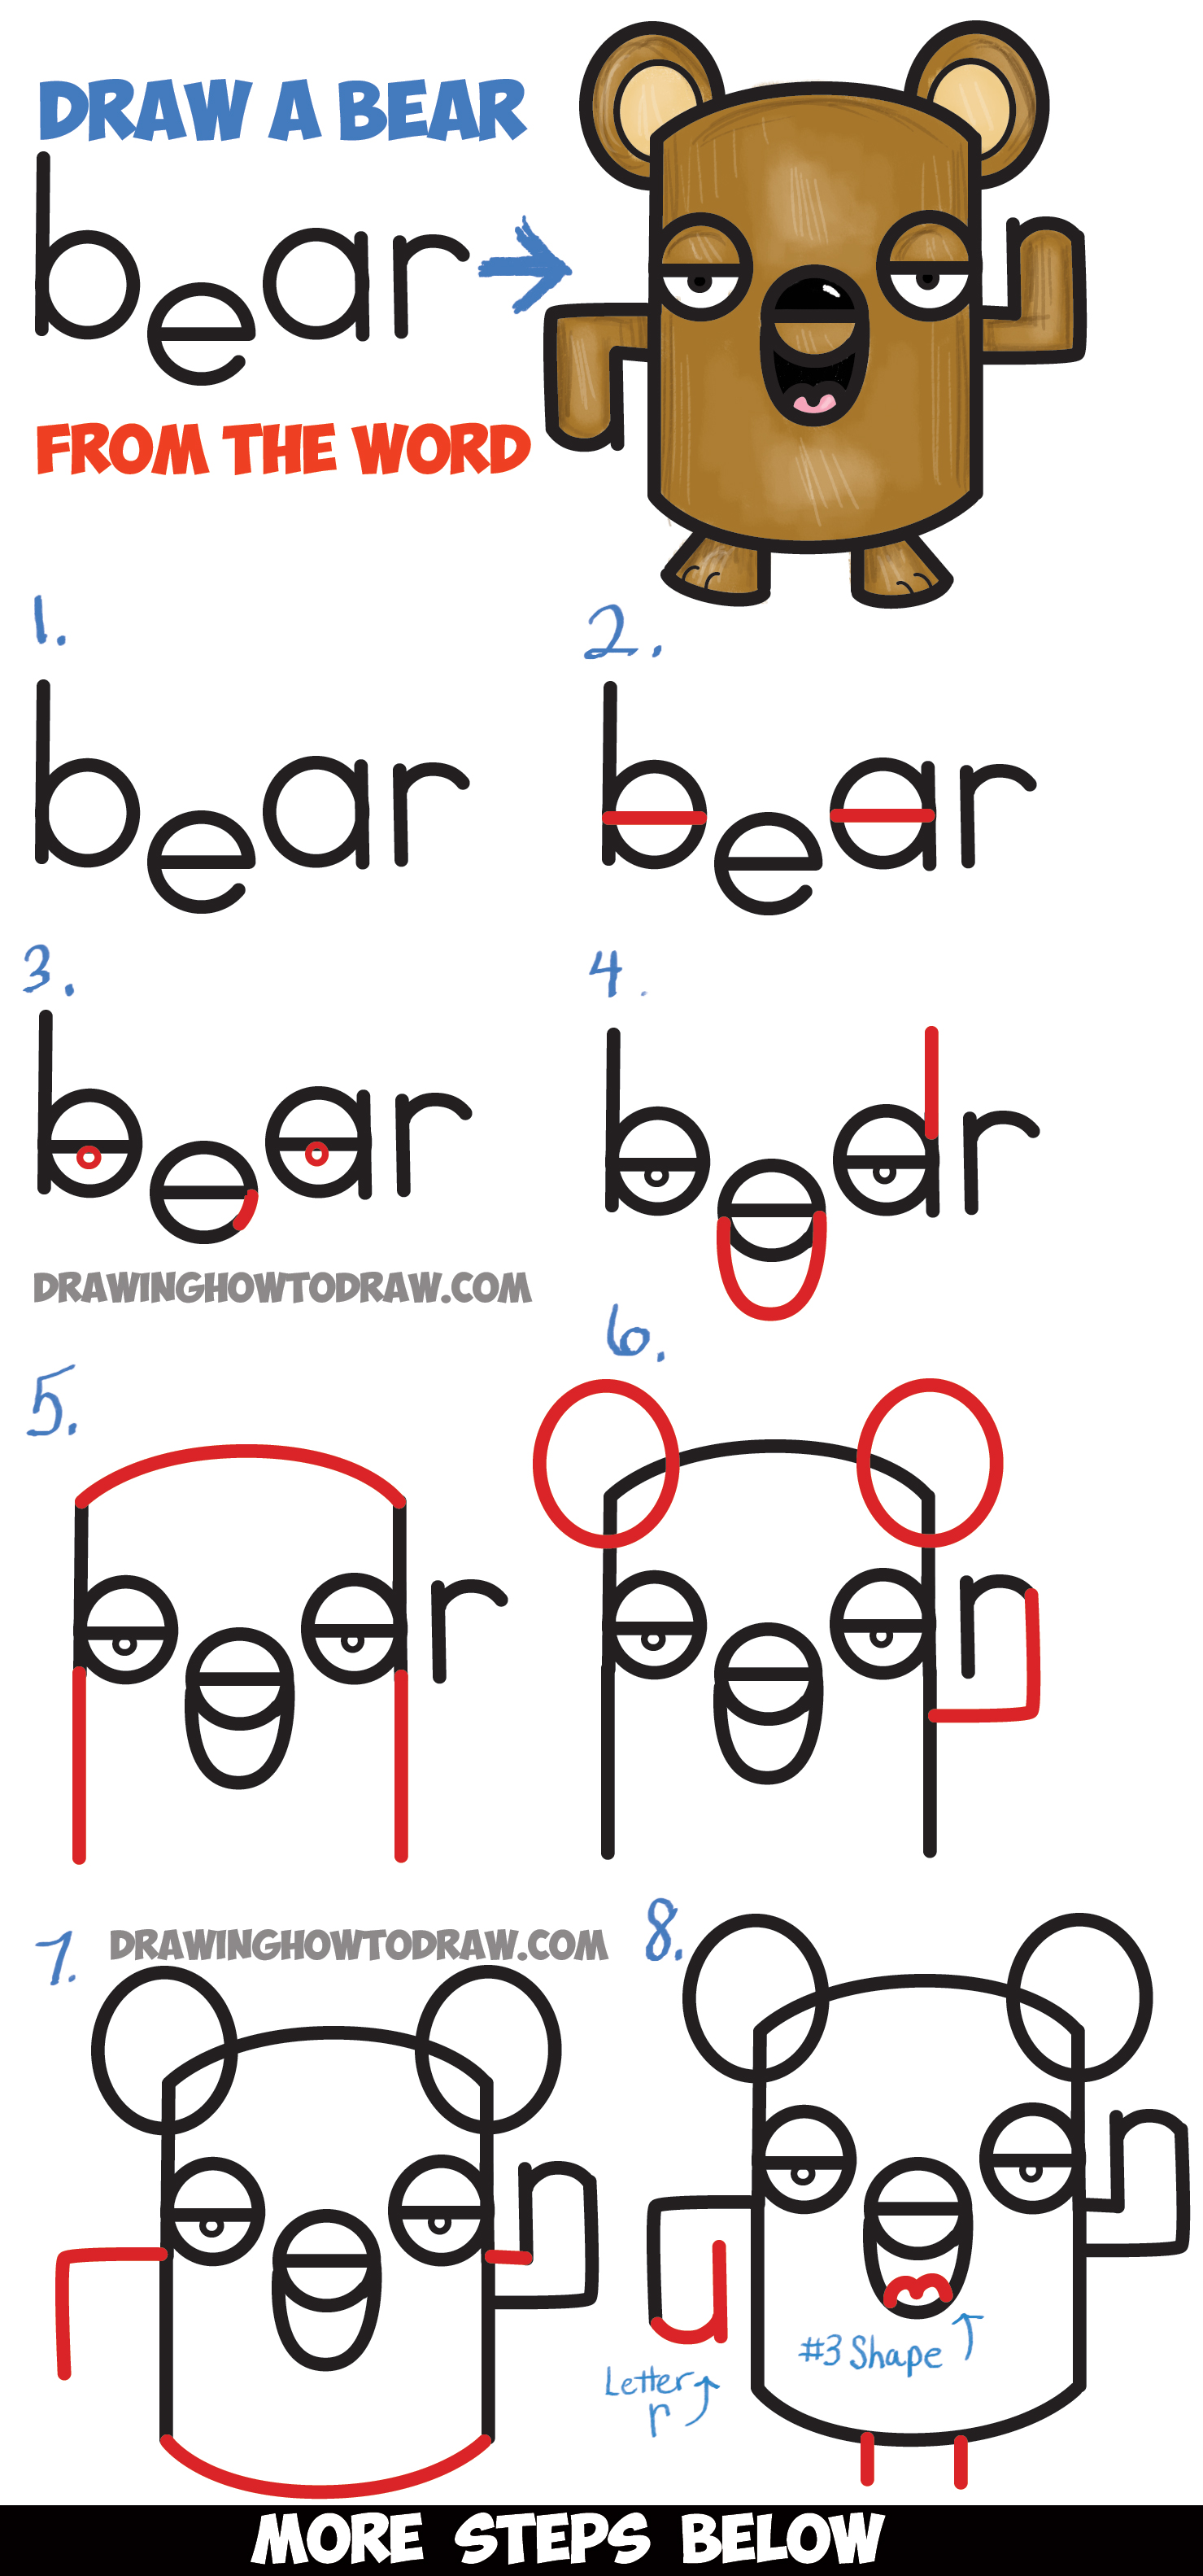 How to Draw a Cartoon Bear from the Word Bear - Bear Word Cartoon Tutorial  for Kids - How to Draw Step by Step Drawing Tutorials